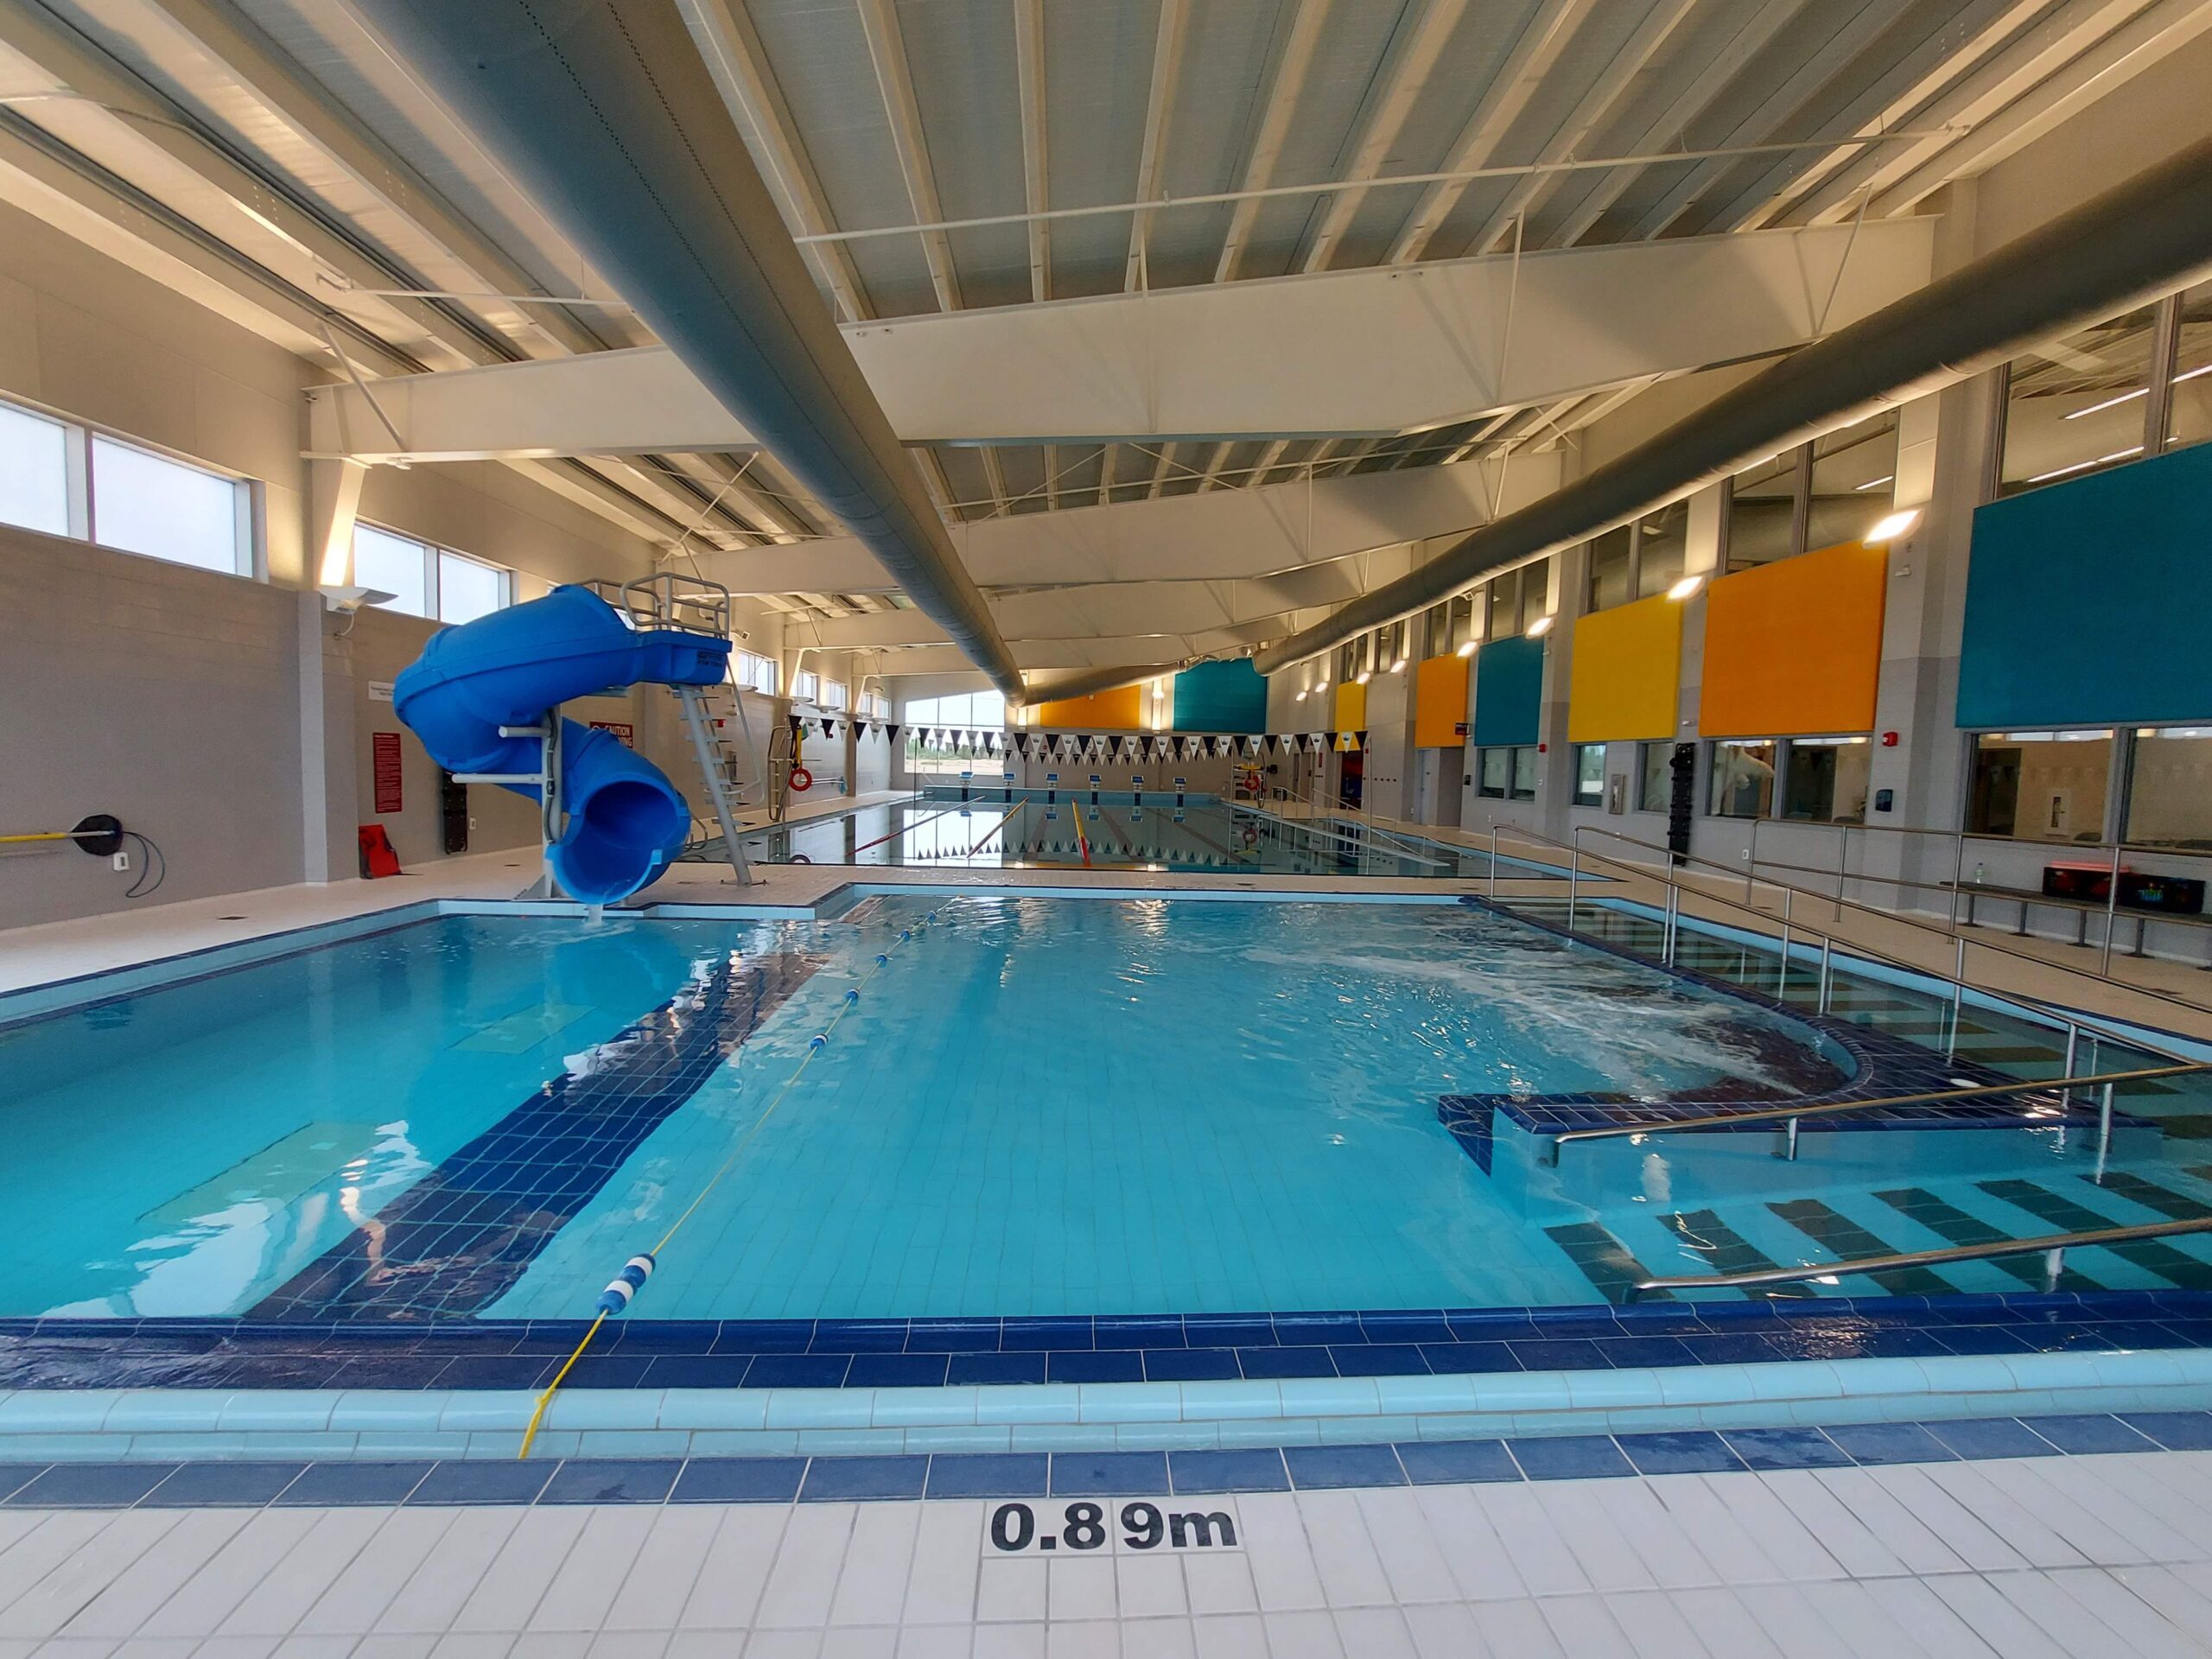 a wide angle view of a swimming pool with a ramp and slide